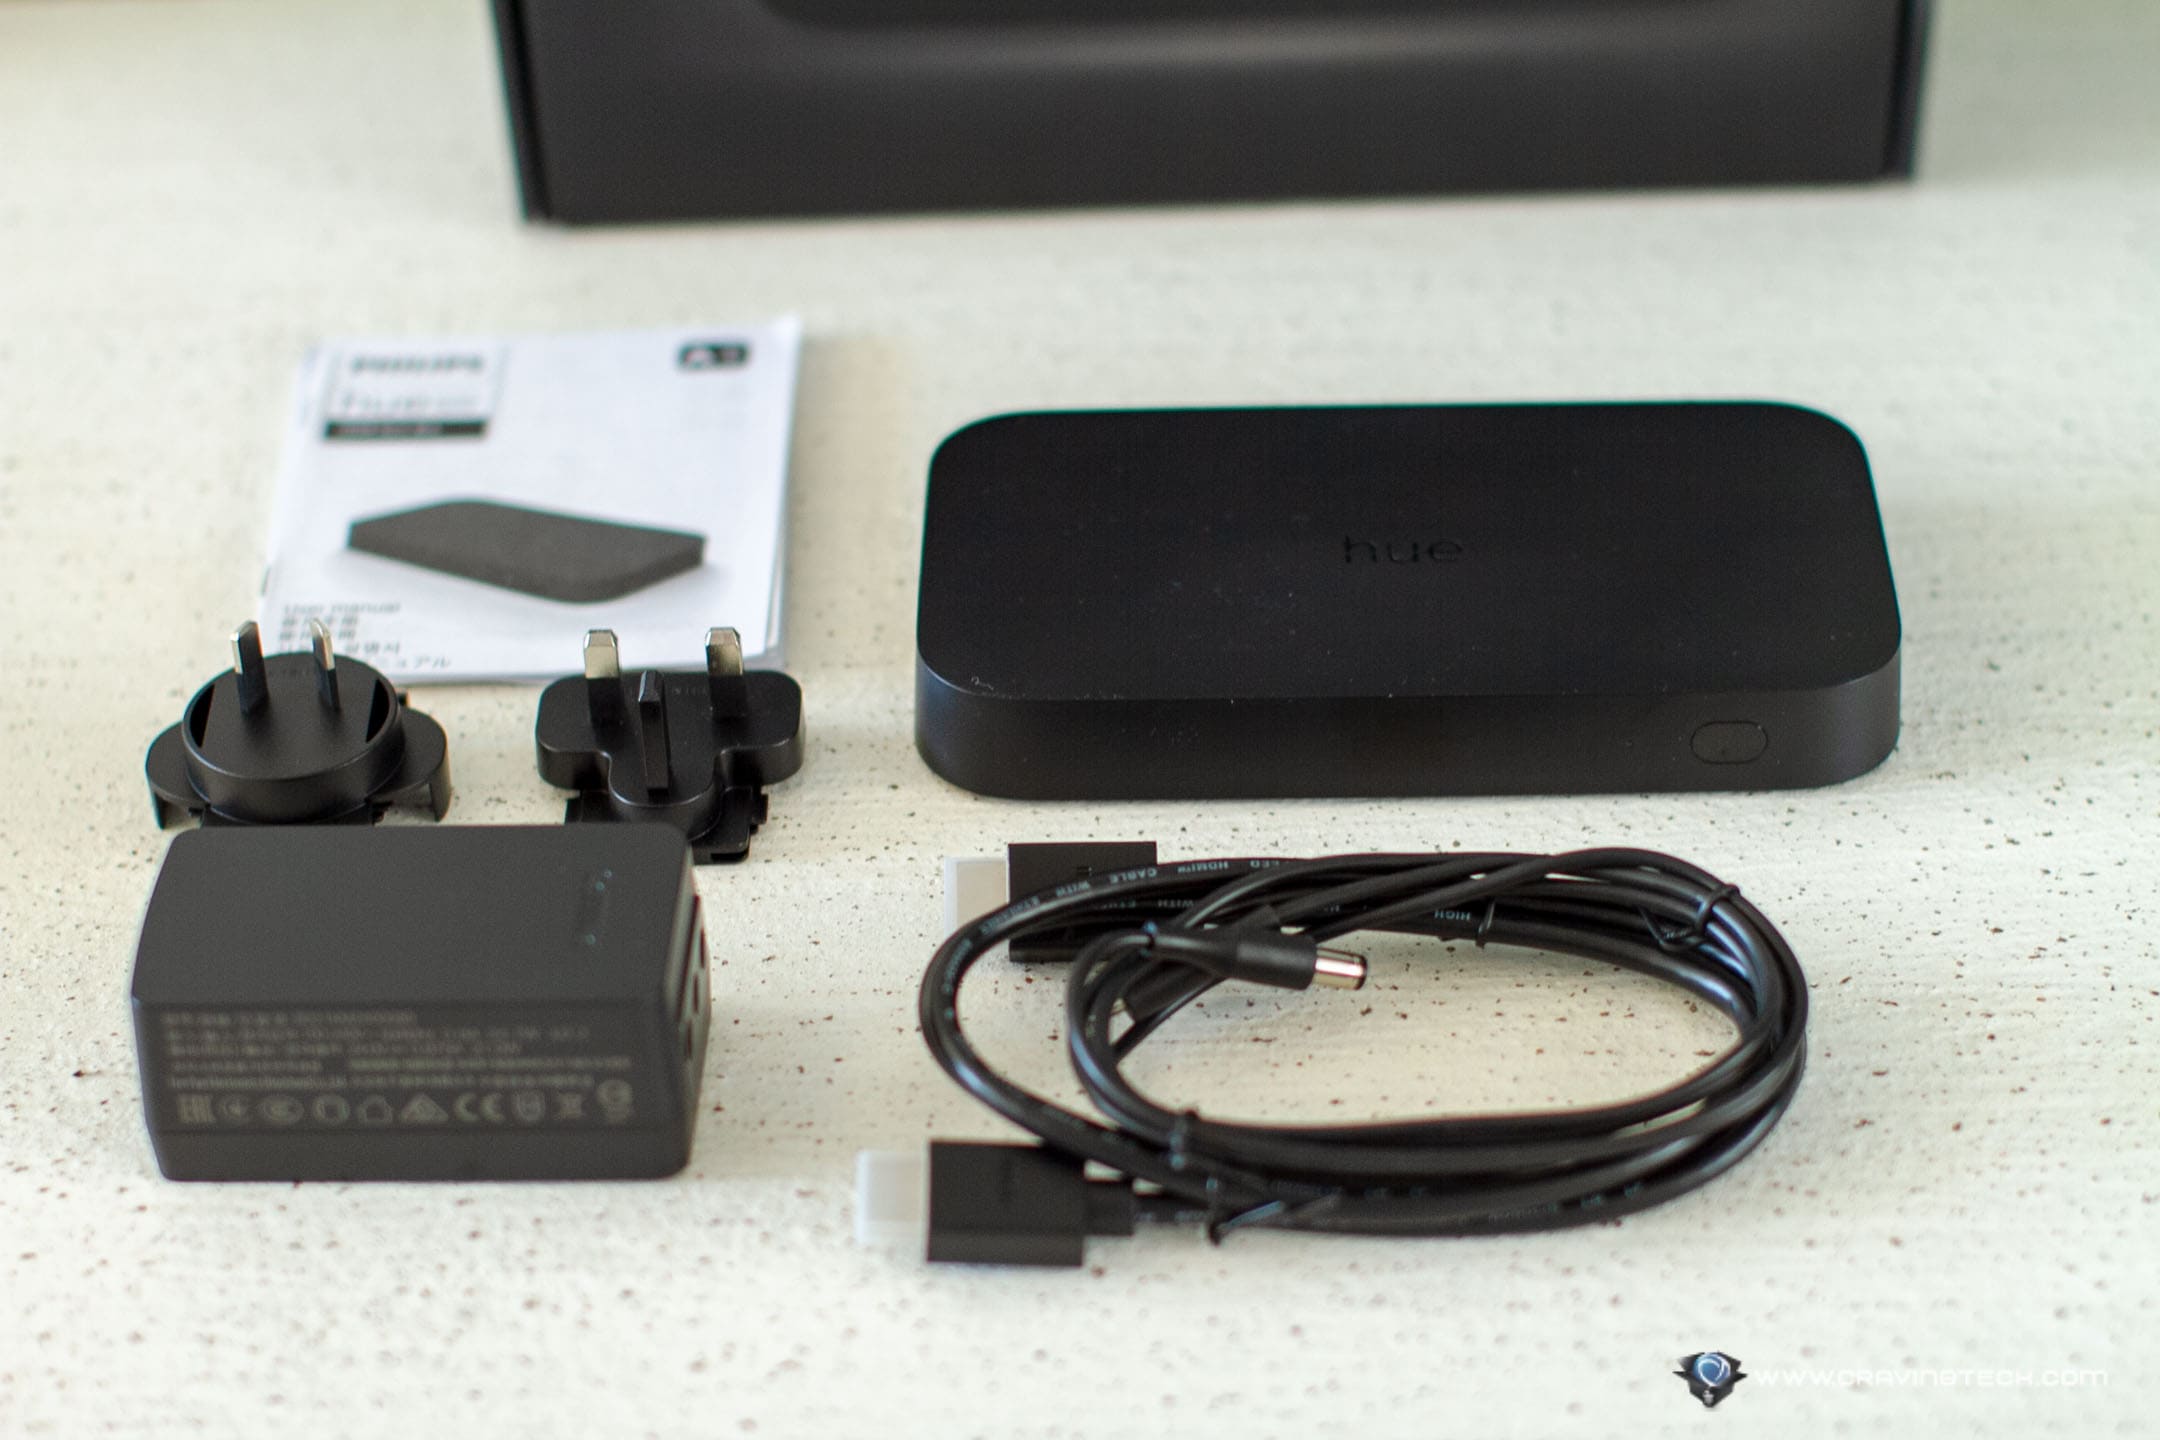 Philips Hue Play HDMI Sync Box review: Sync your lights, most of